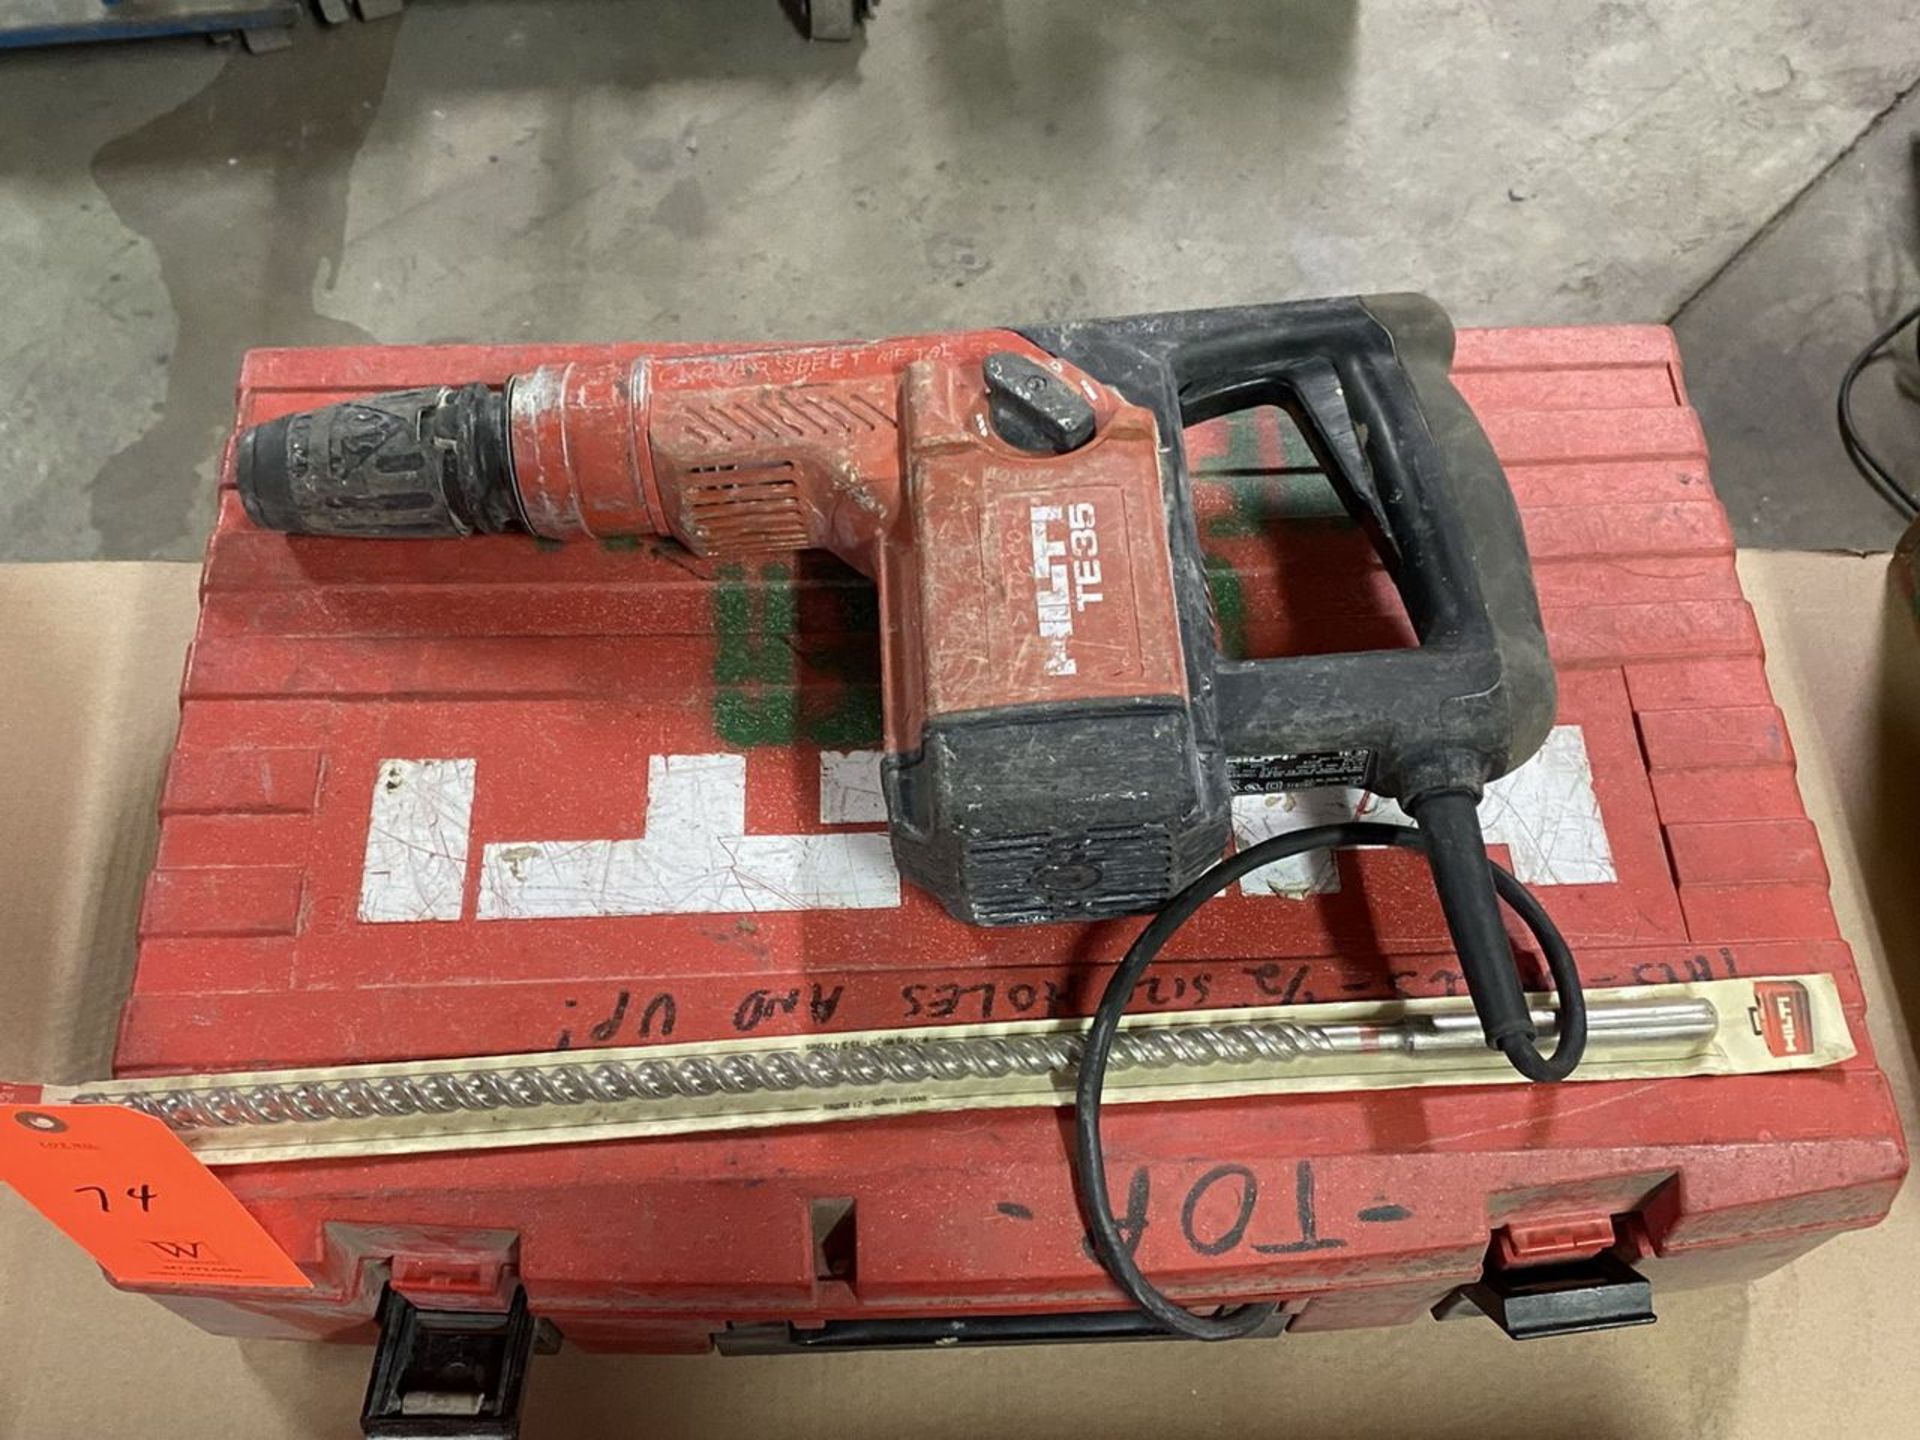 Hilti 1/4 in. Model TE-35 Rotary Hammer; 120-V, AC, with Hilti 1/2 in.-21 Drill and Carrying Case - Image 2 of 2